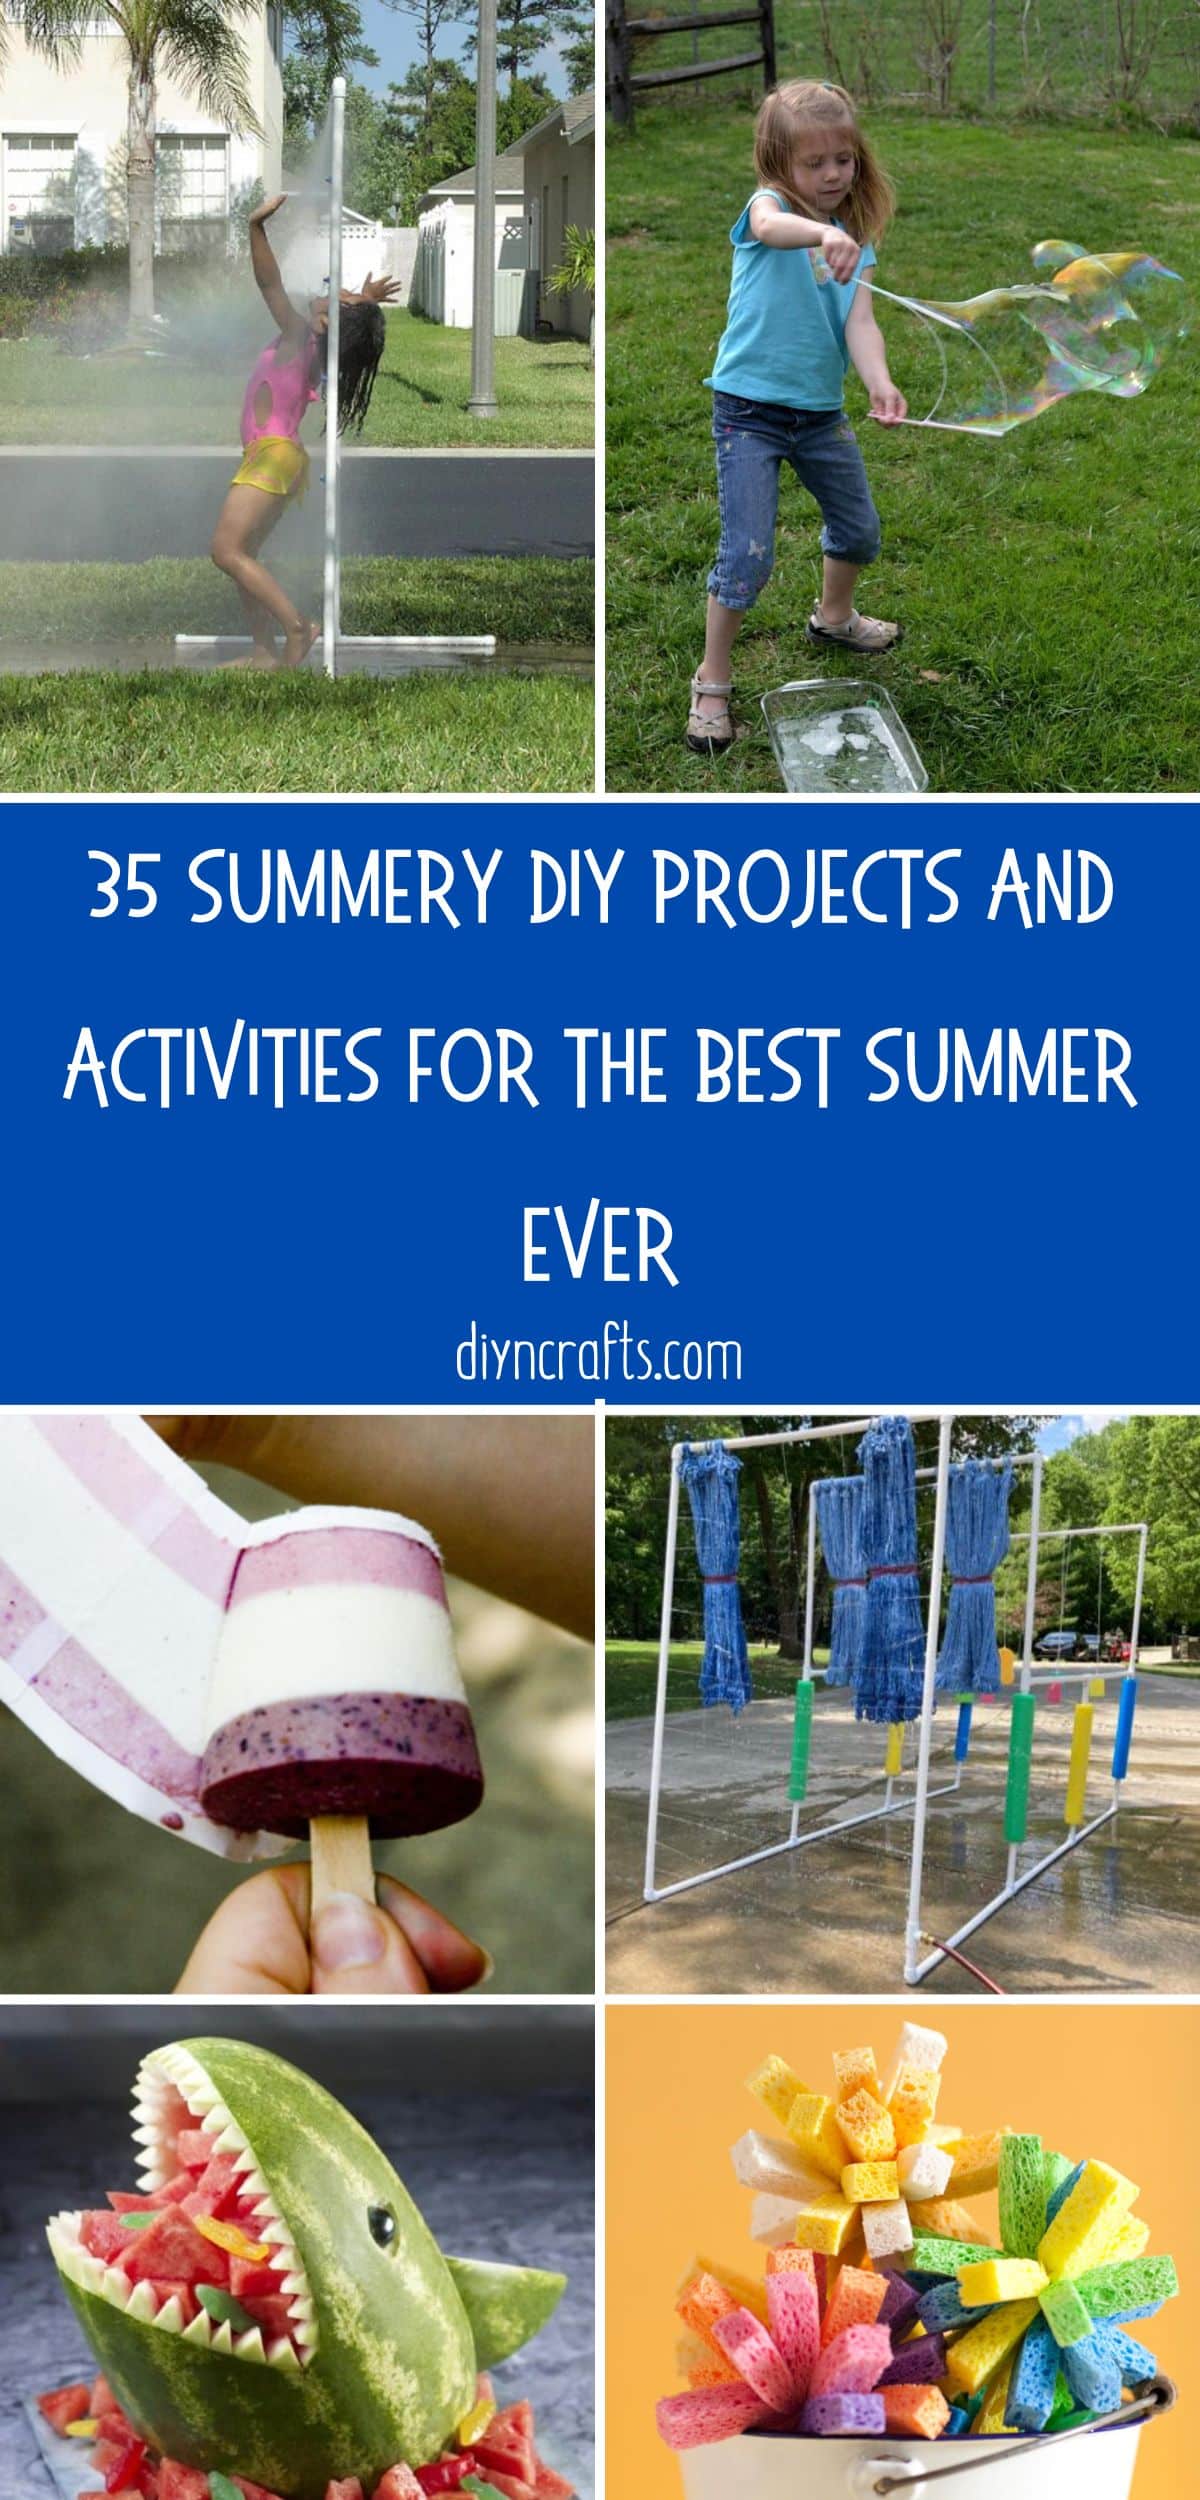 35 Summery DIY Projects And Activities For The Best Summer Ever collage.